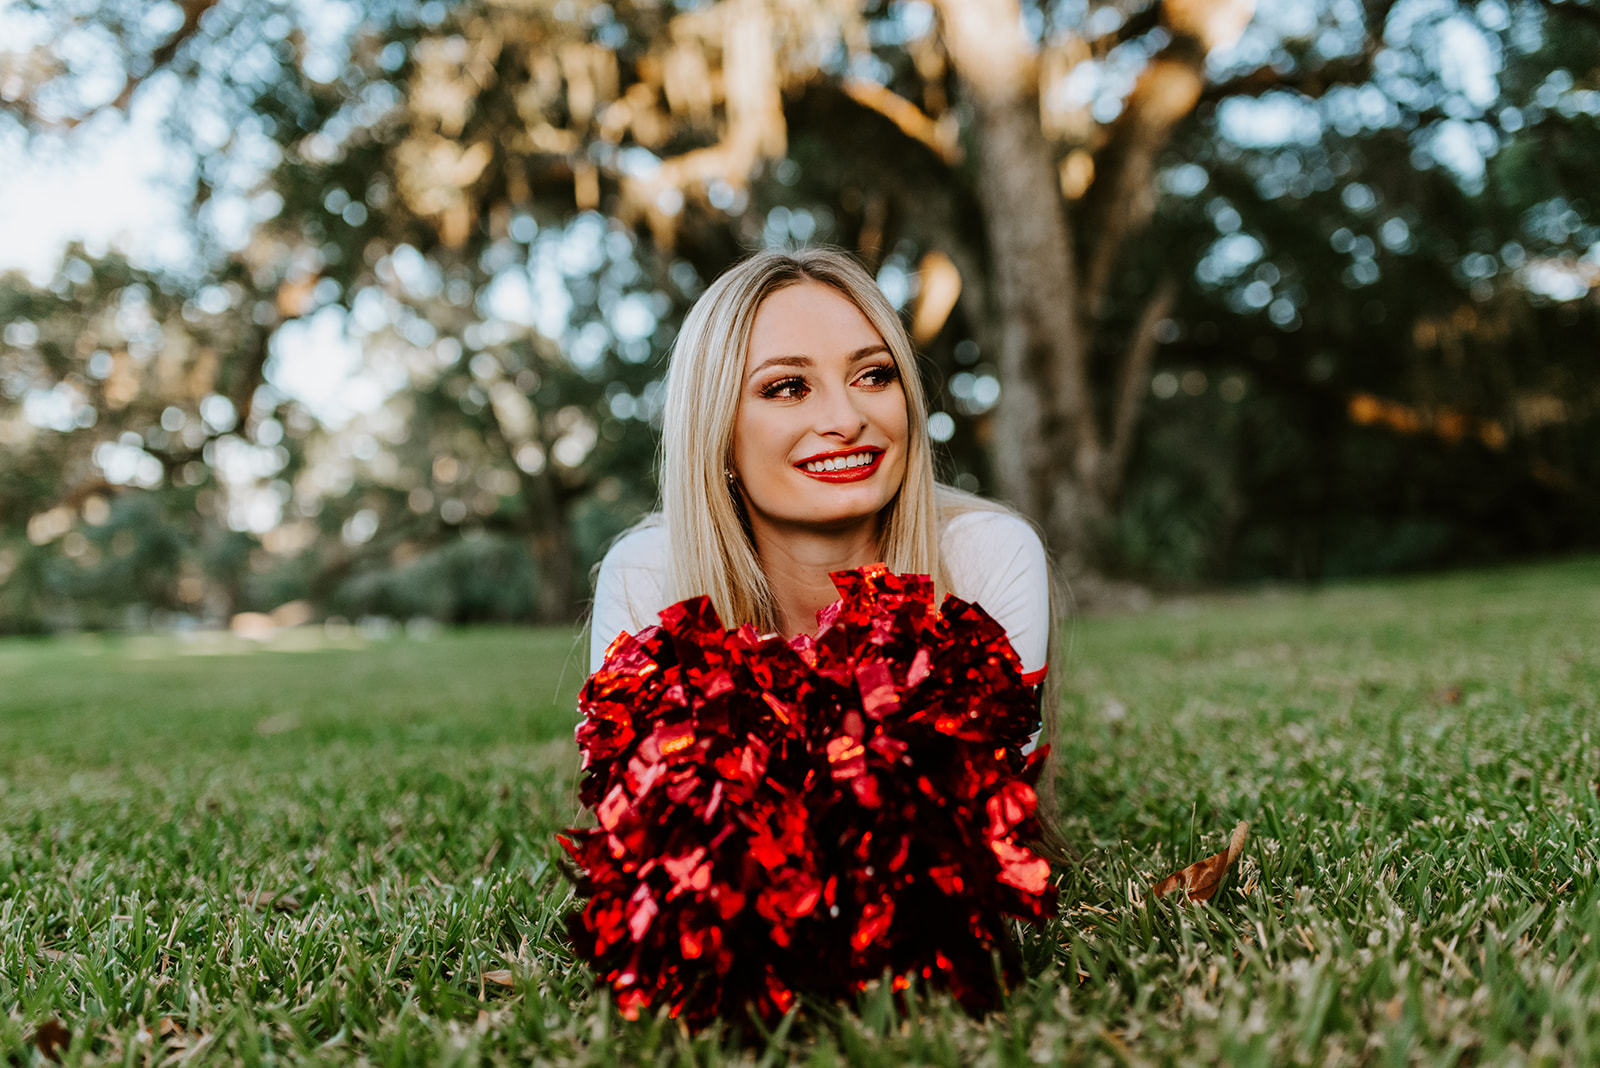 pom poms make perfect prop for senior pictures